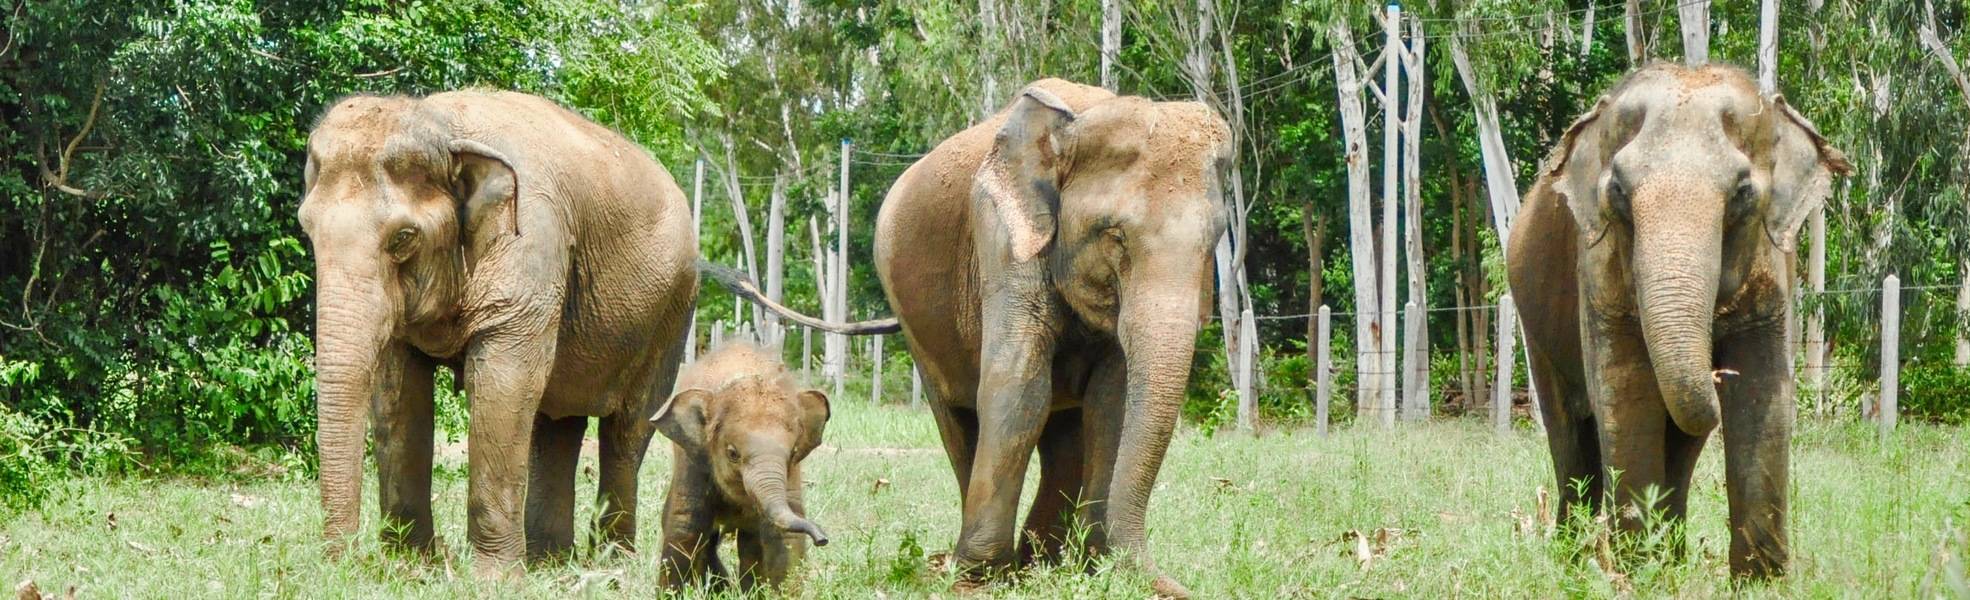 Volunteering with elephants in Thailand - protection for pachyderms